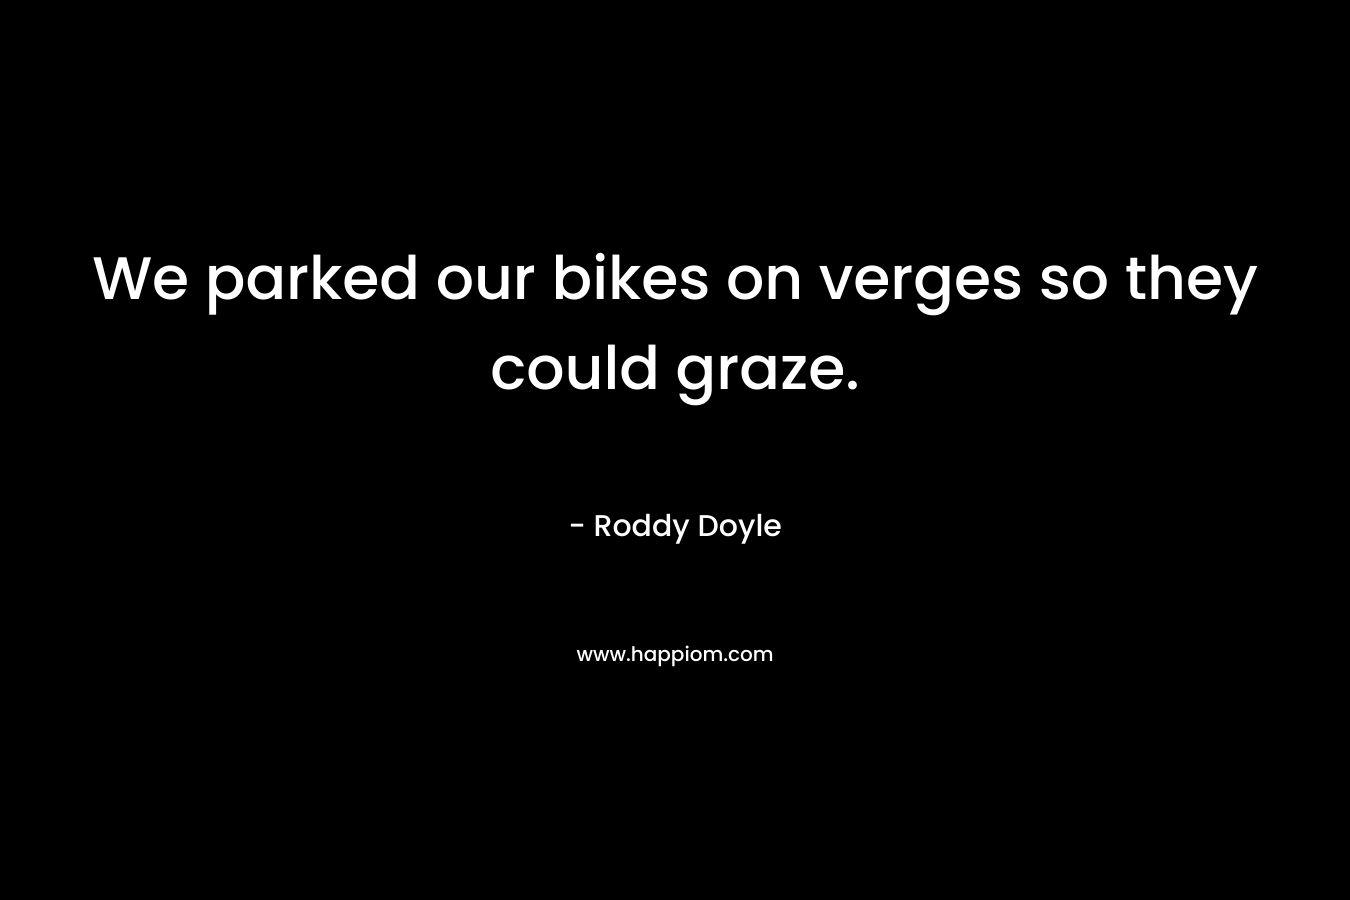 We parked our bikes on verges so they could graze. – Roddy Doyle